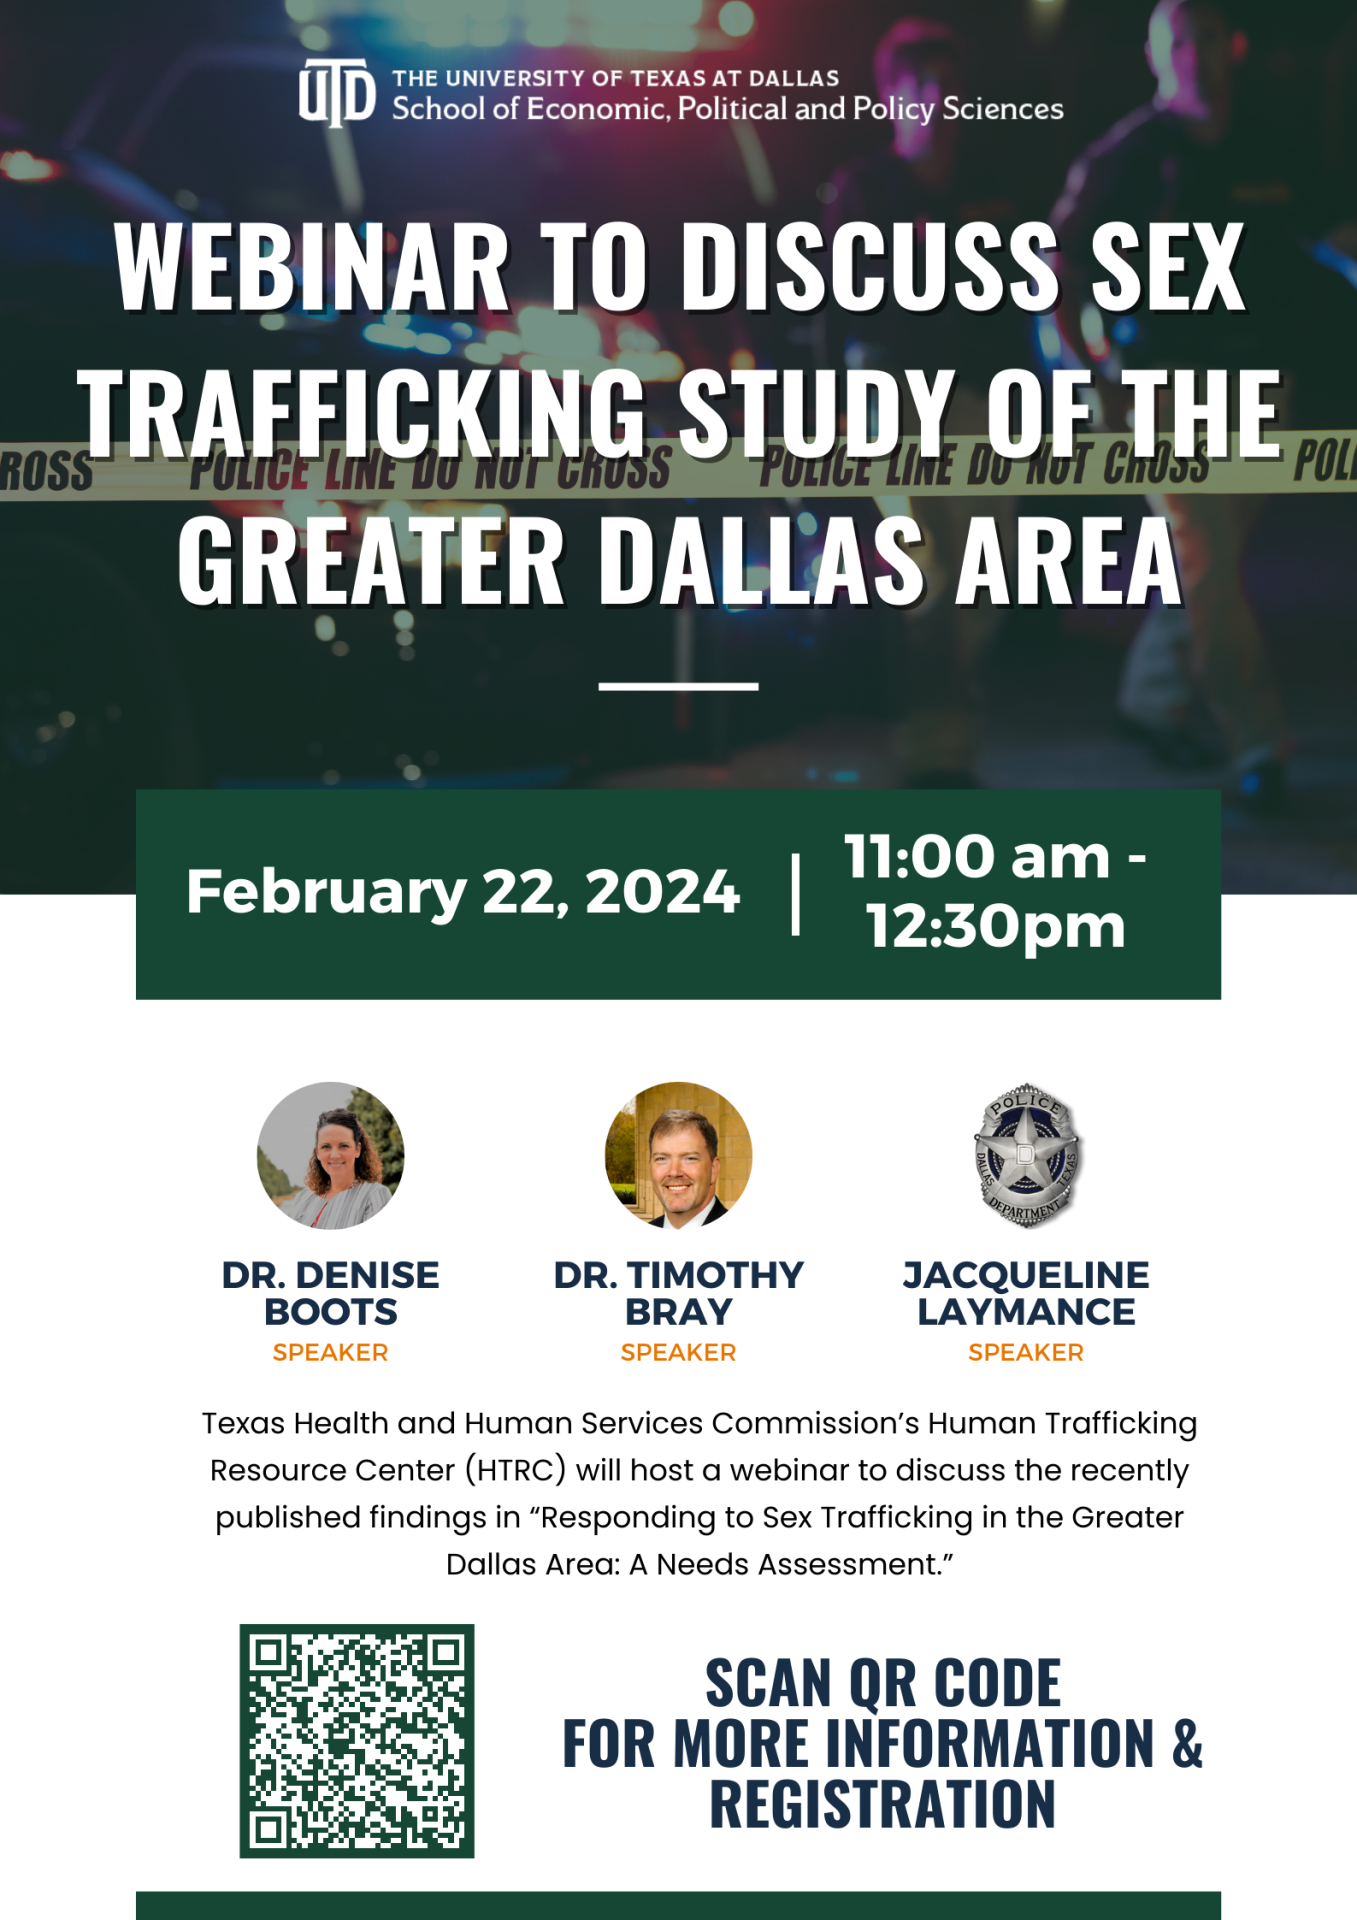 Webinar to Discuss Sex Trafficking Study of the Greater Dallas Area.
February 22, 2024 11:00 am to 12:30 pm. Speakers: Dr. Denise Boots, Dr. Timothy Bray, and Jacqueline Laymance. Texas Health and Human Services Commission's Human Trafficking Resource Center (HTRC) will host a webinar to discuss the recently published findings in "Responding to Sex Trafficking in the Greater Dallas Area: A Needs Assessment."